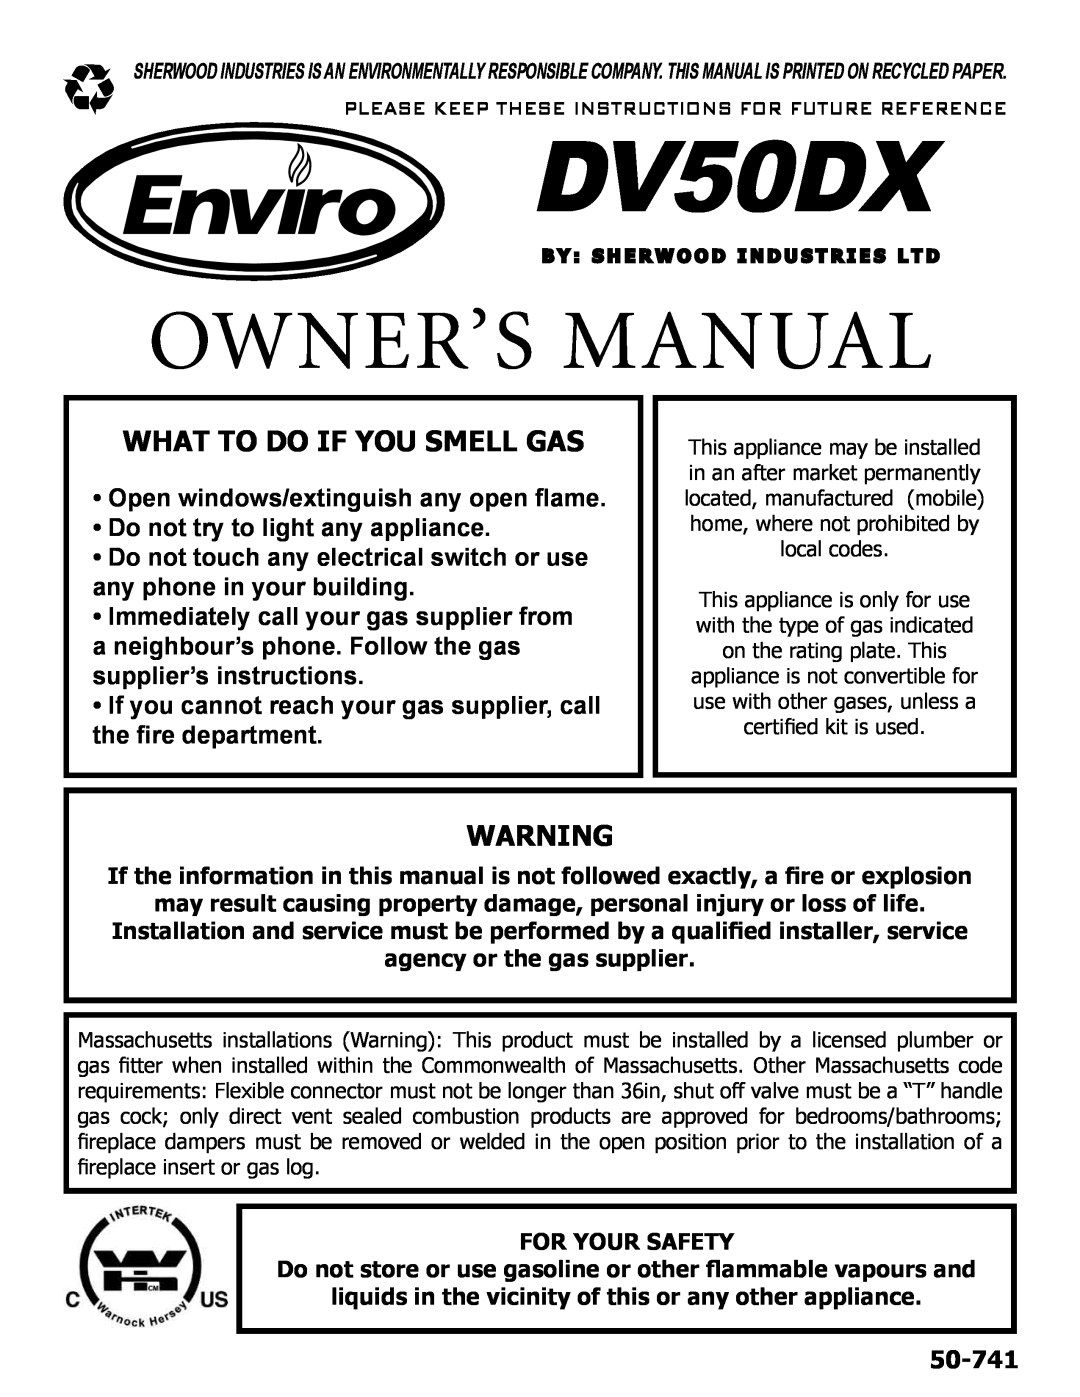 Enviro DV50DX owner manual What To Do If You Smell Gas, Open windows/extinguish any open flame, 50-741 